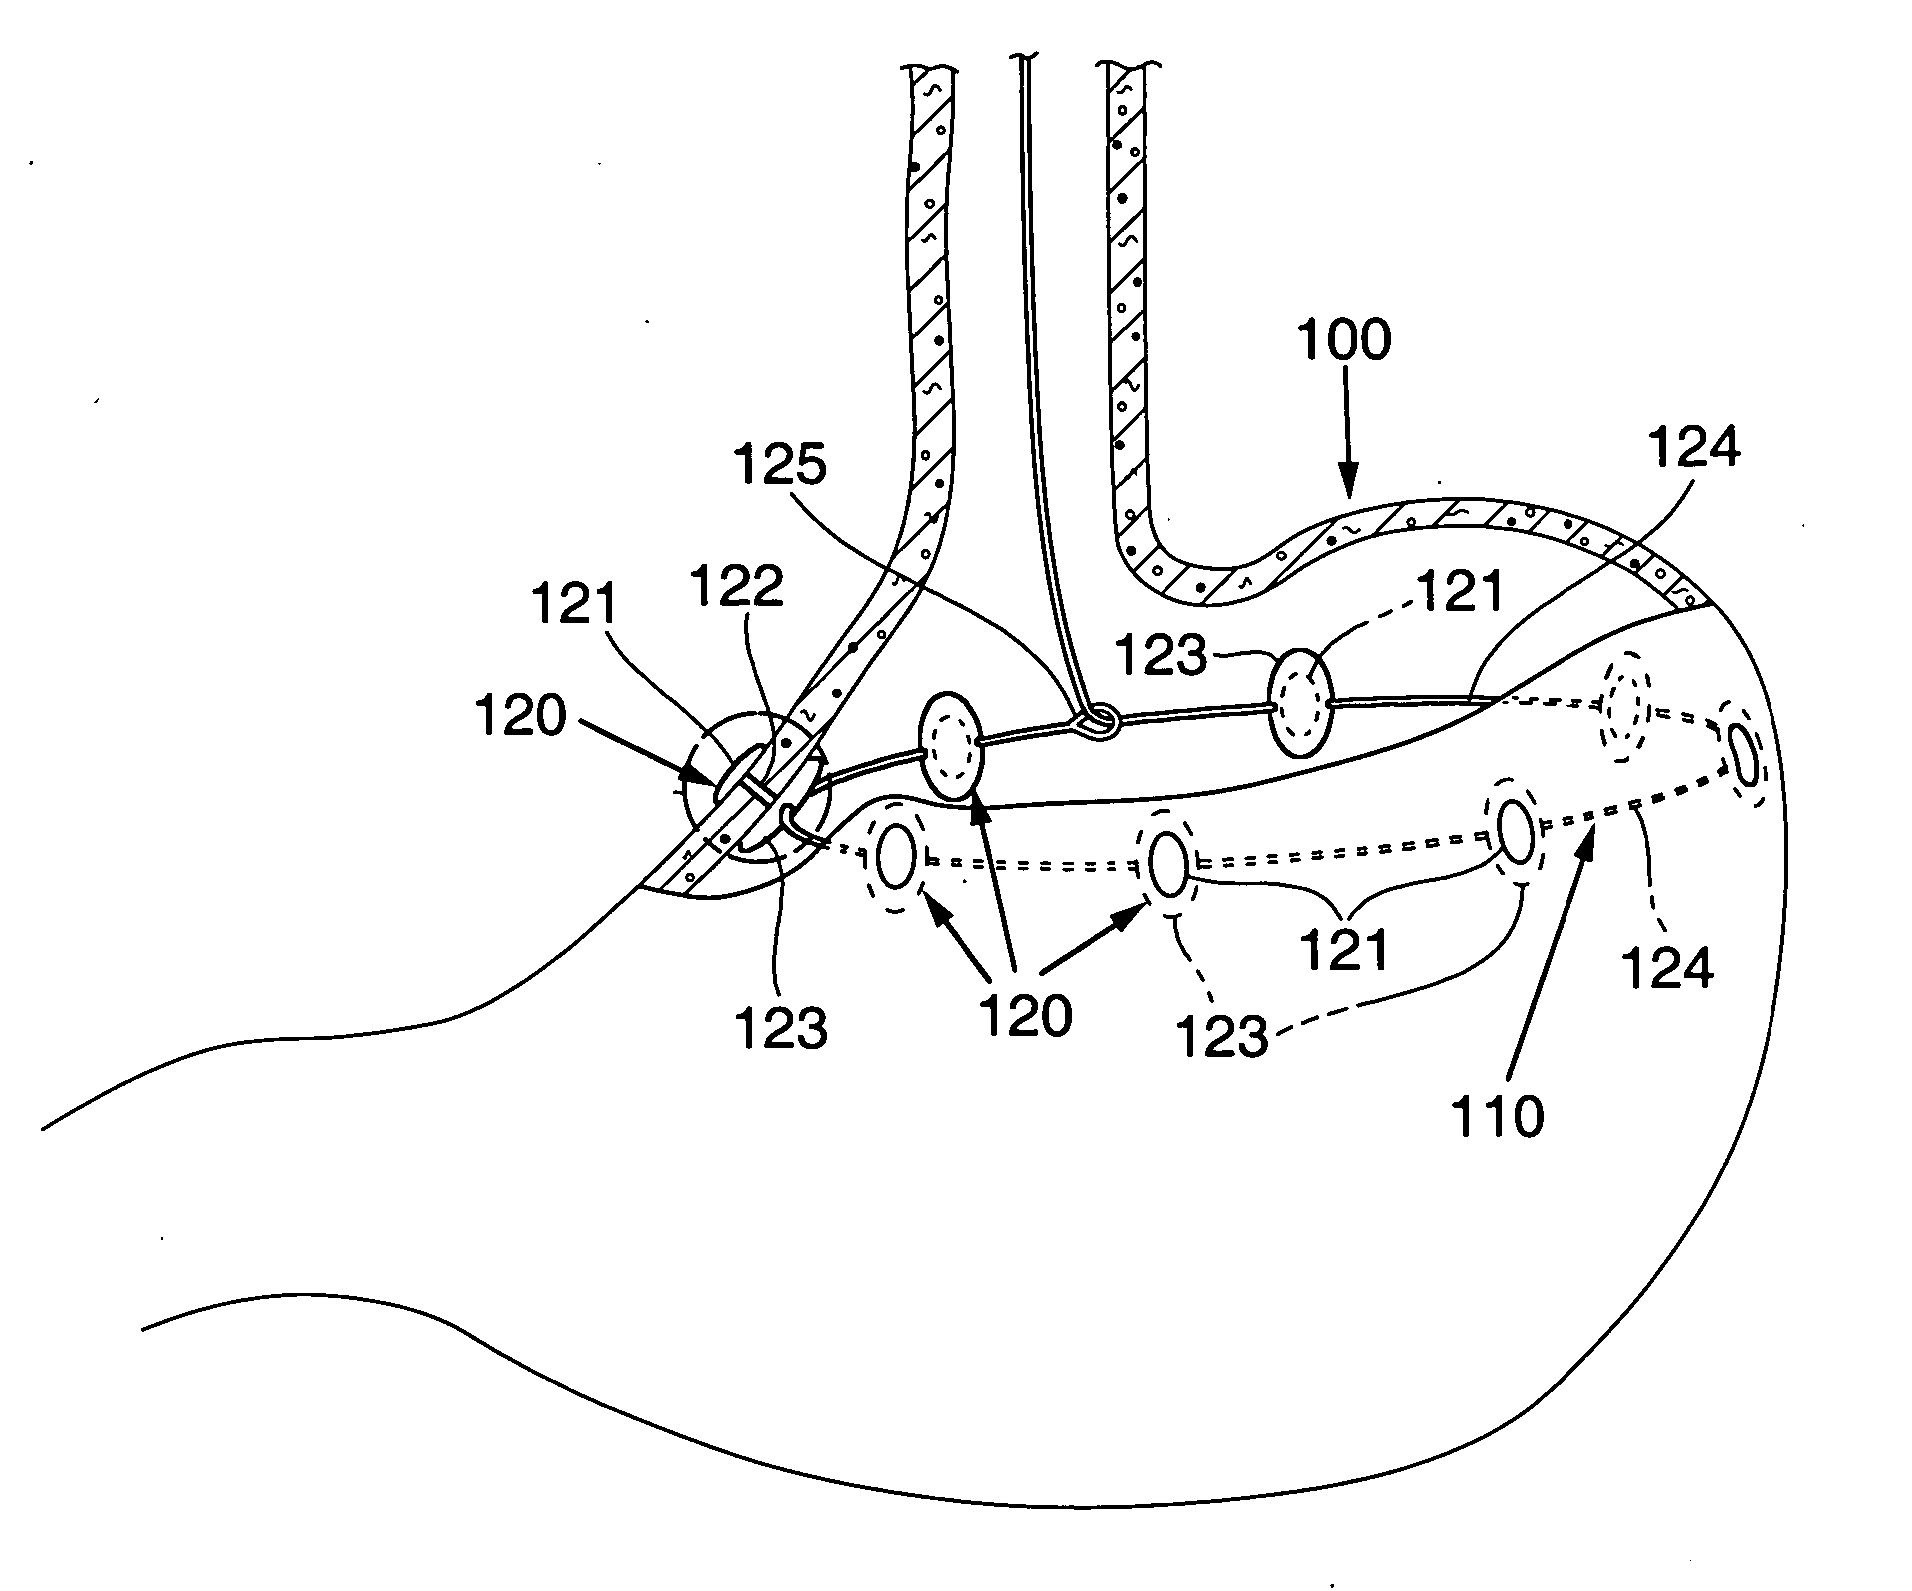 Endoscopic gastric constriction device